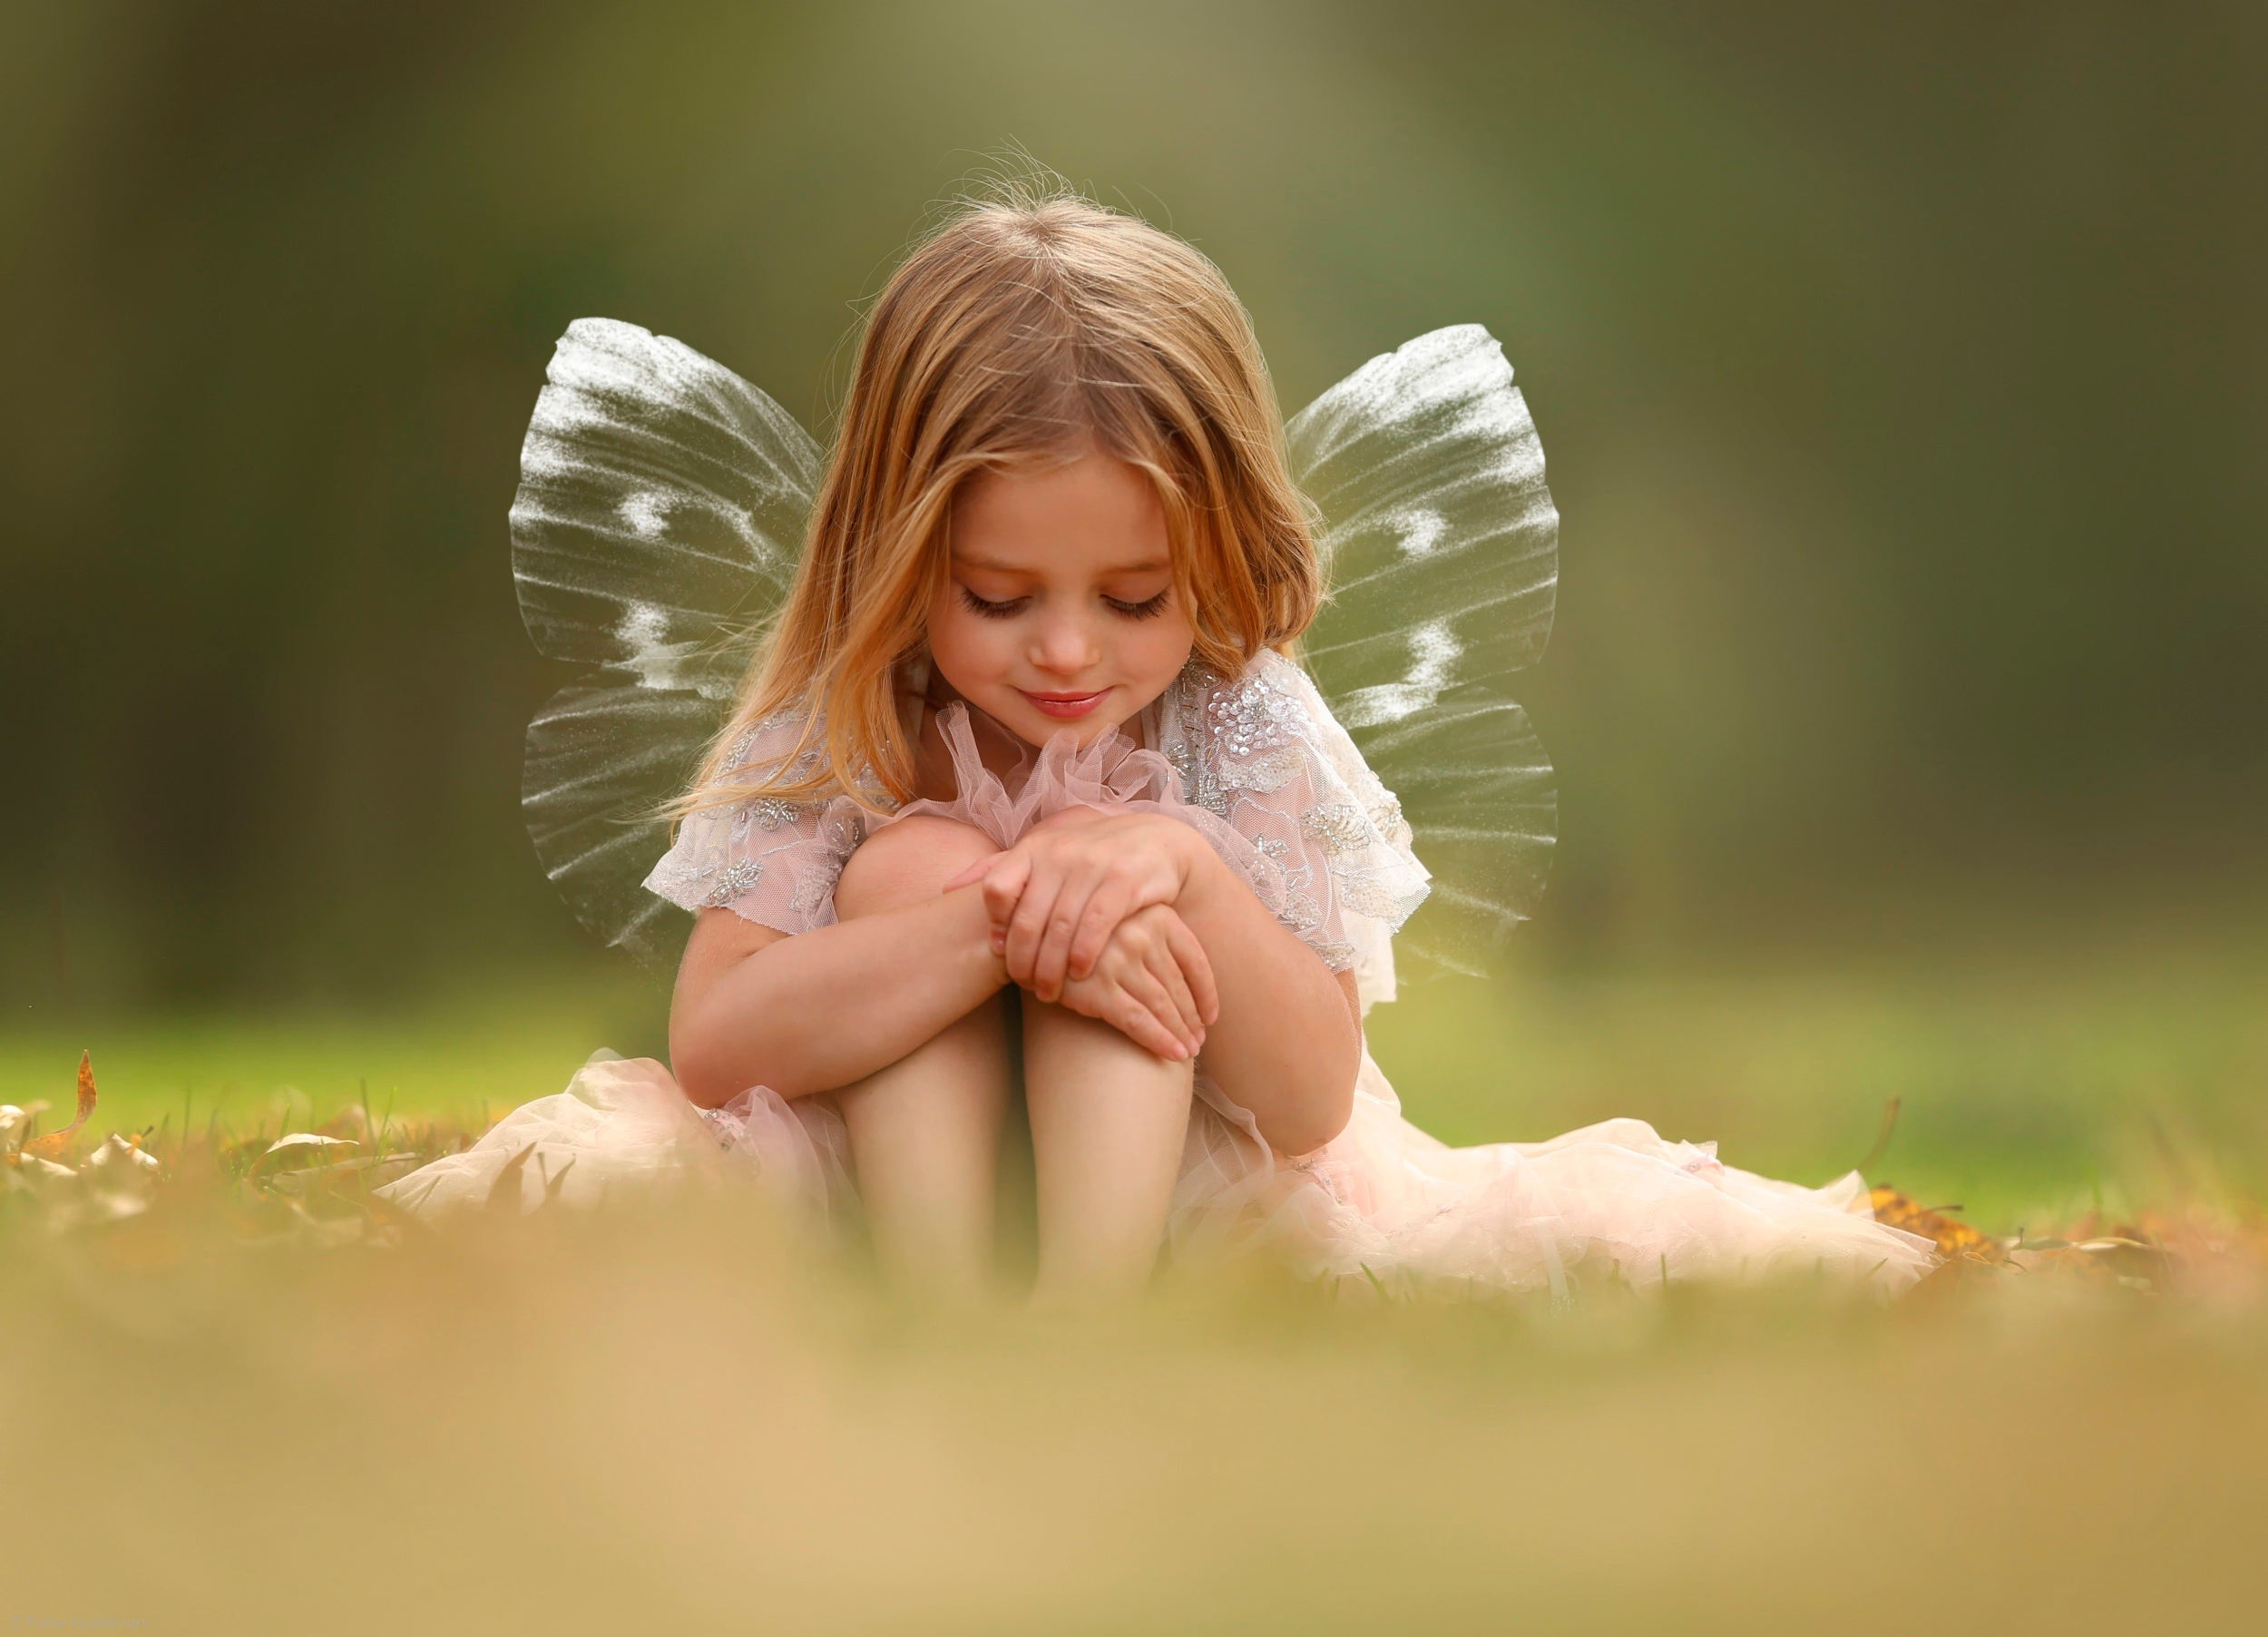 Fairy HD Wallpapers - Top 25 Best HD Fairy Wallpapers Download